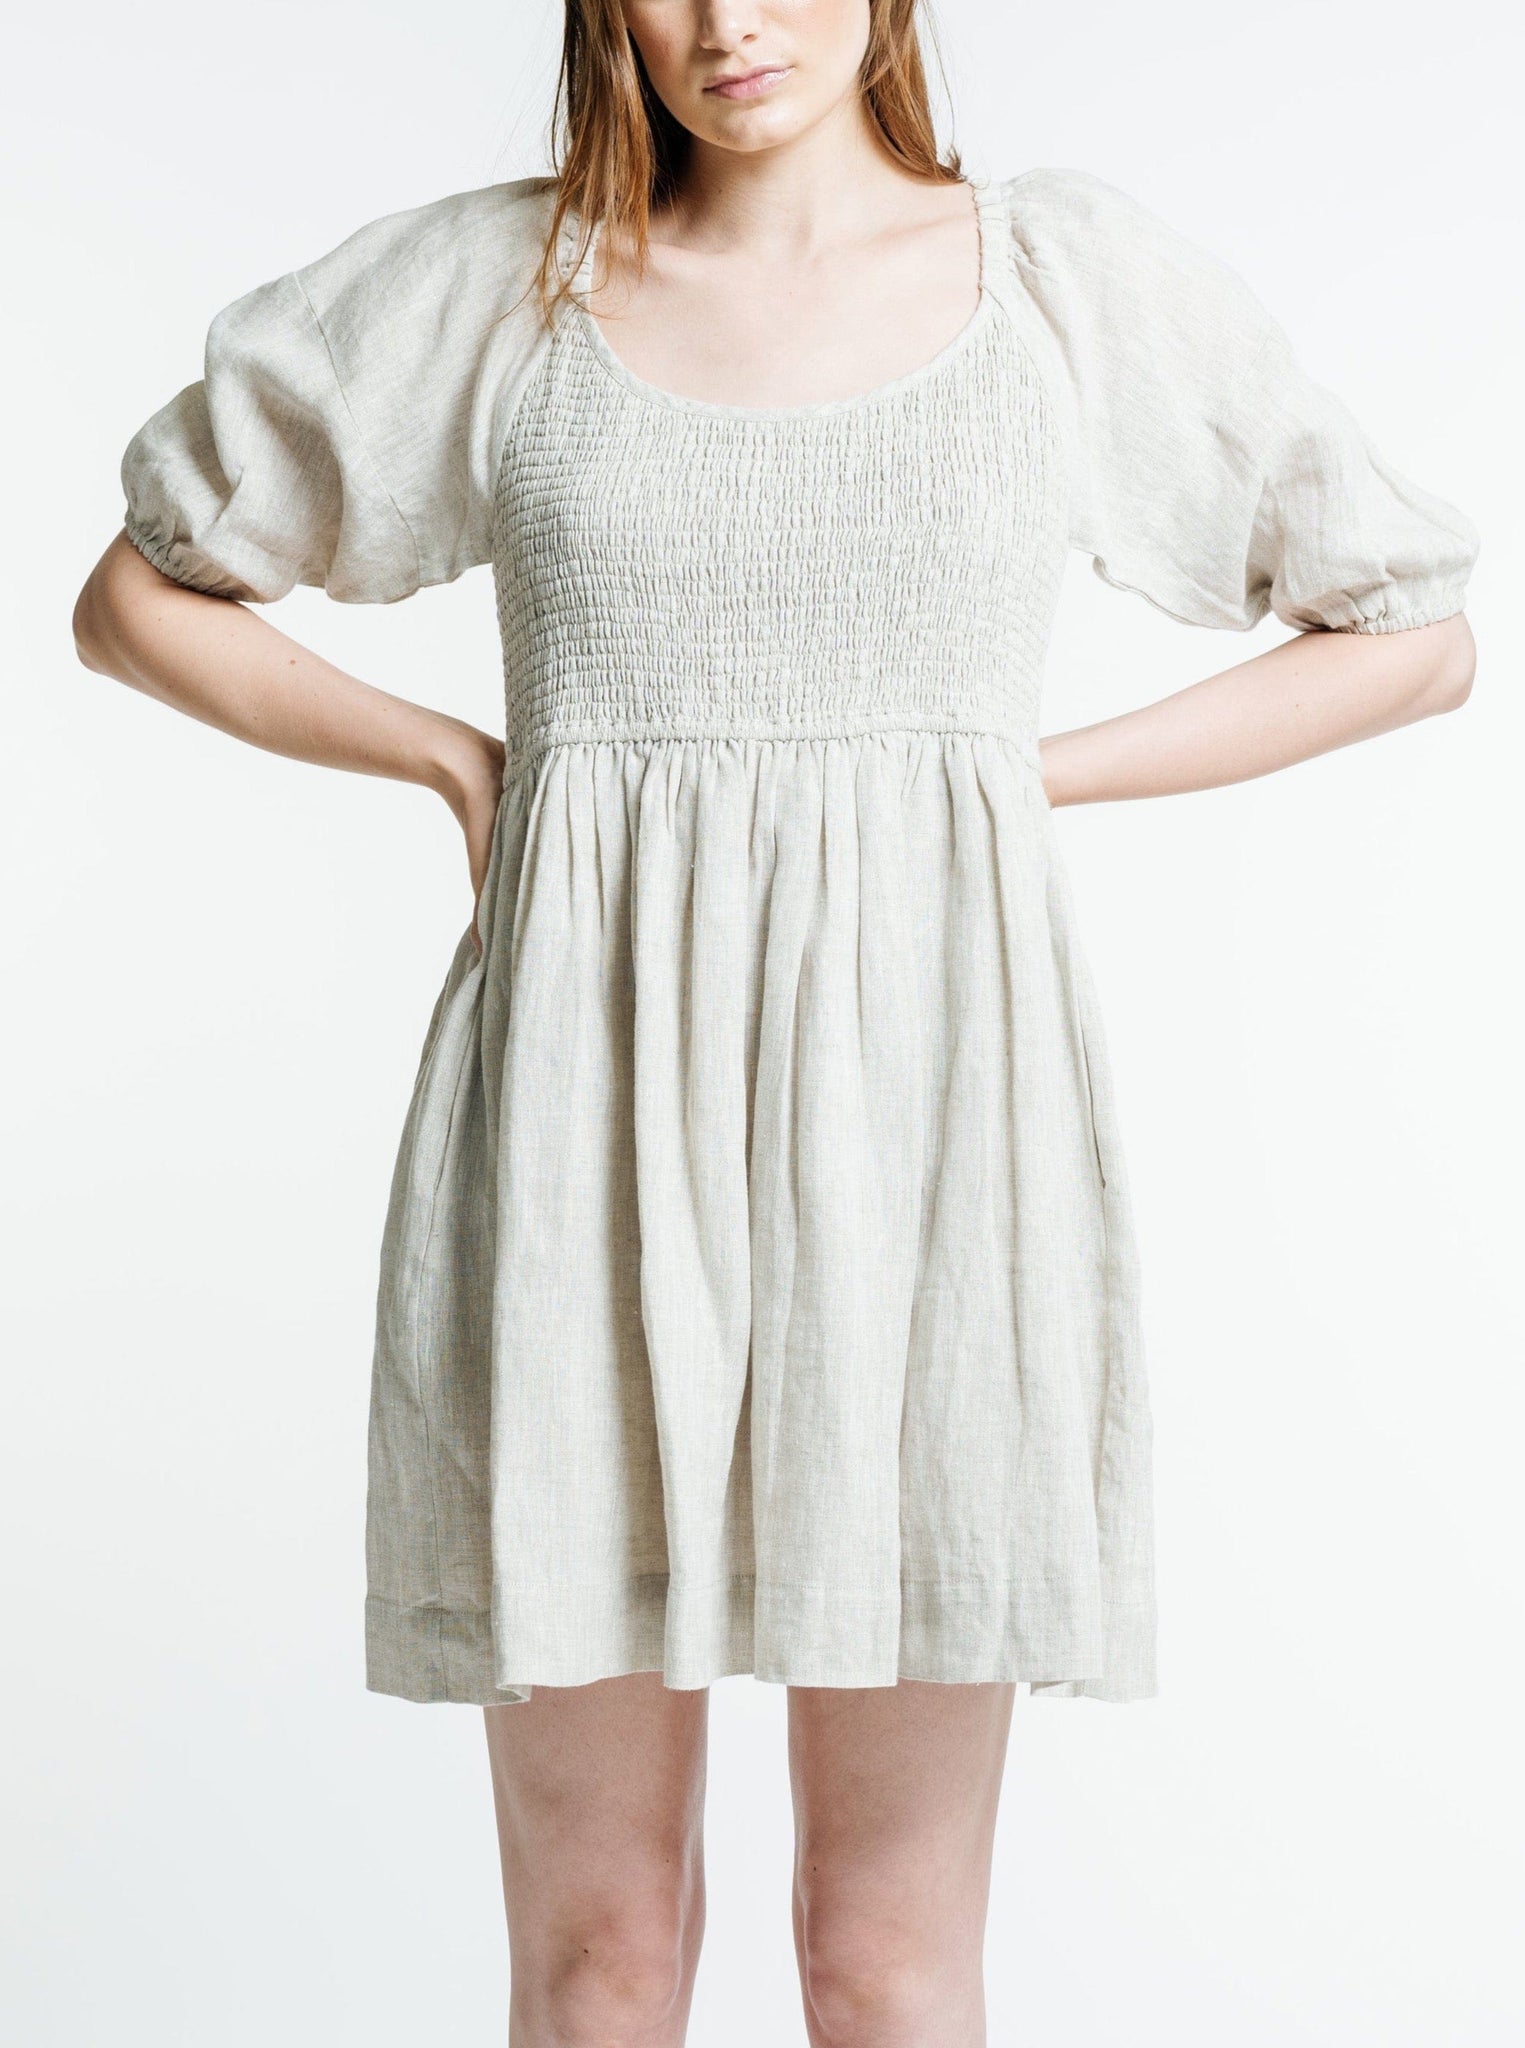 The model is wearing a Carmen Mini Dress - Natural in organic linen, perfect for the summer sun.